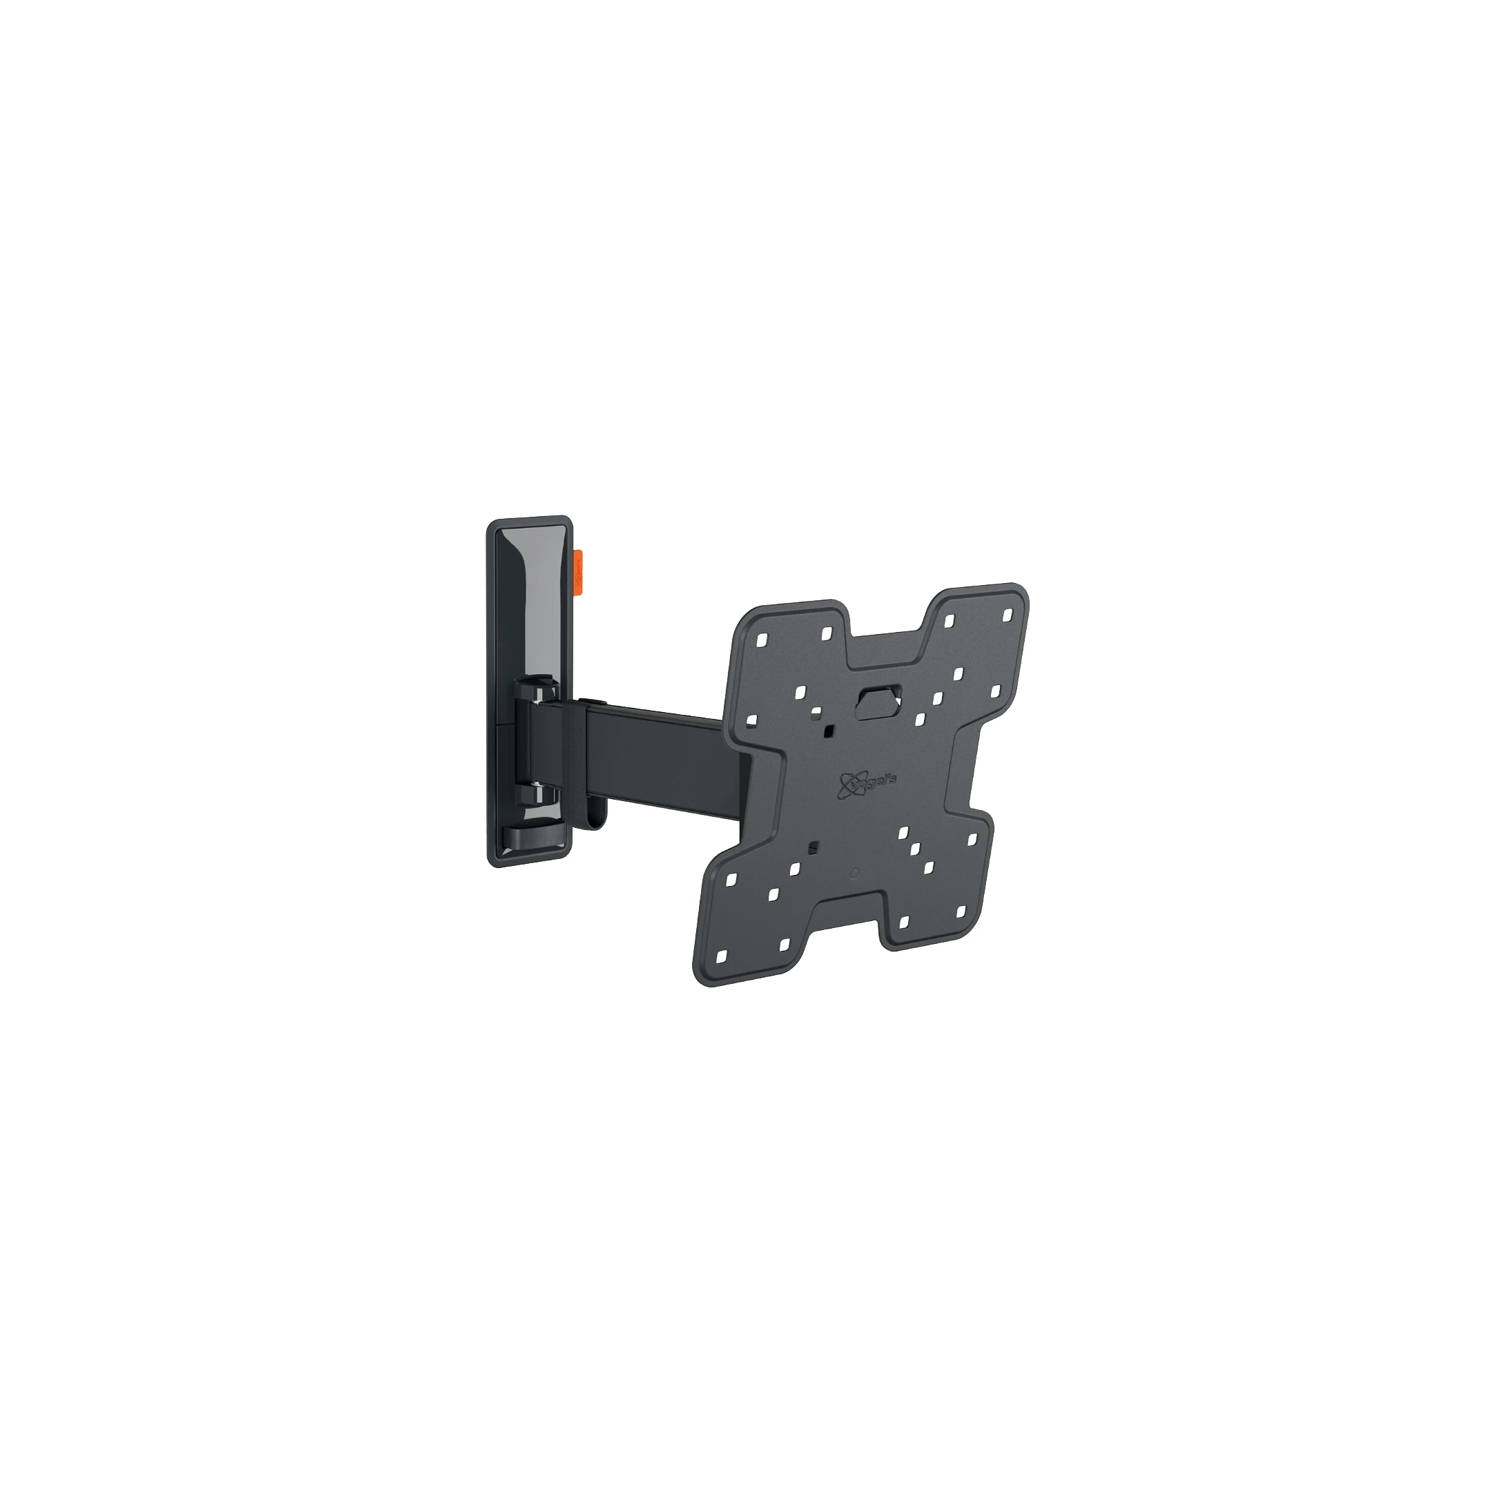 Vogels Tvm 3225 Full Motion Small Wall Mount Tvm3225